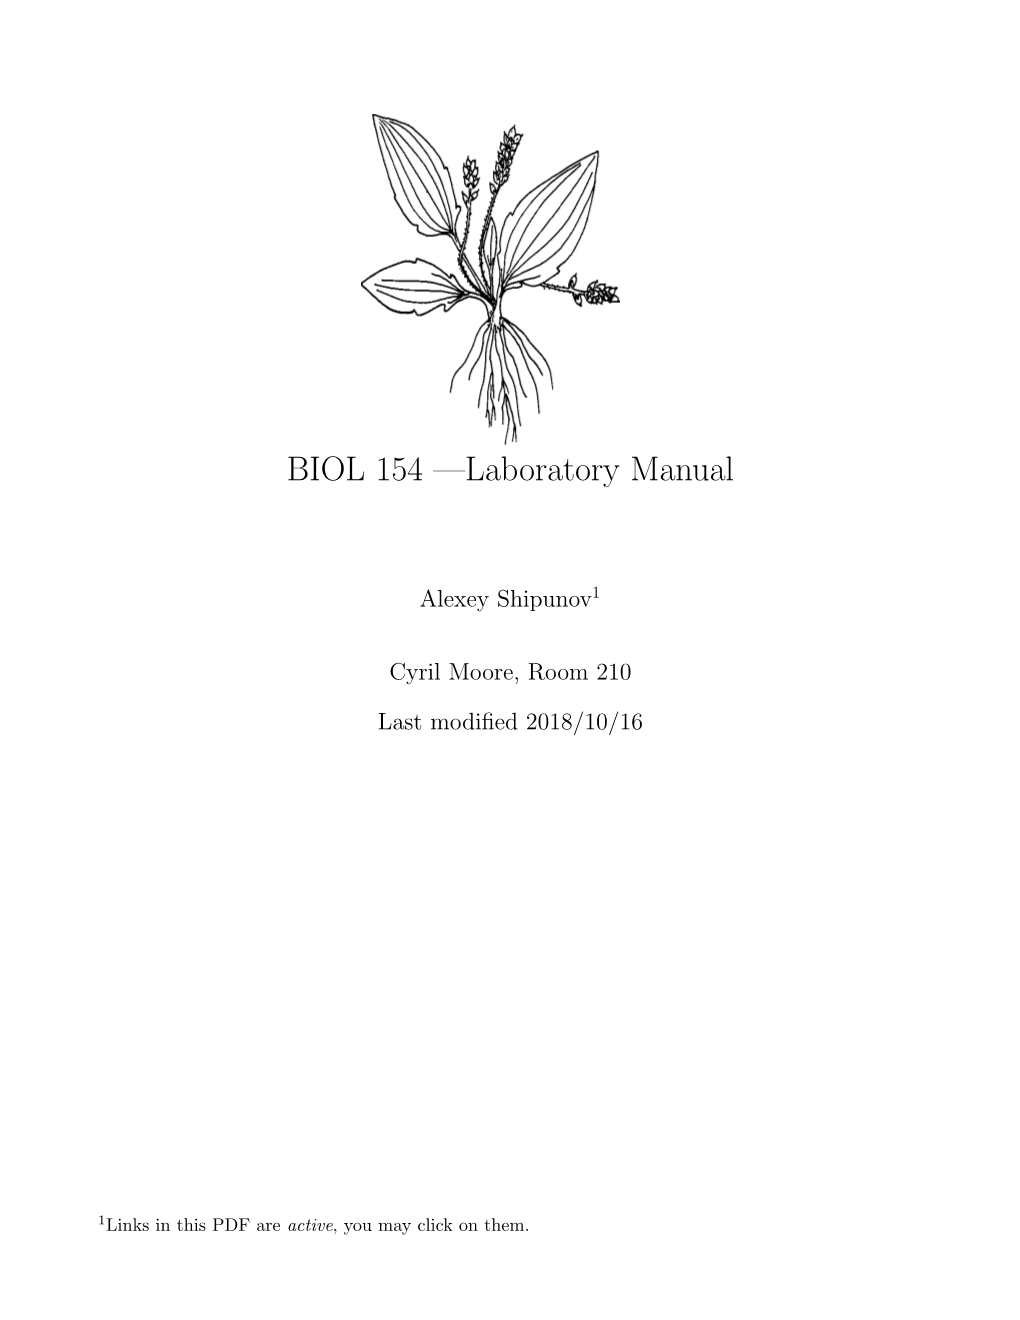 Lab Manual) • Botanical Names/Terms of the Respective Cell Or Tissue Parts That You Observe and Illustrate (Taken from the Lab Manual)